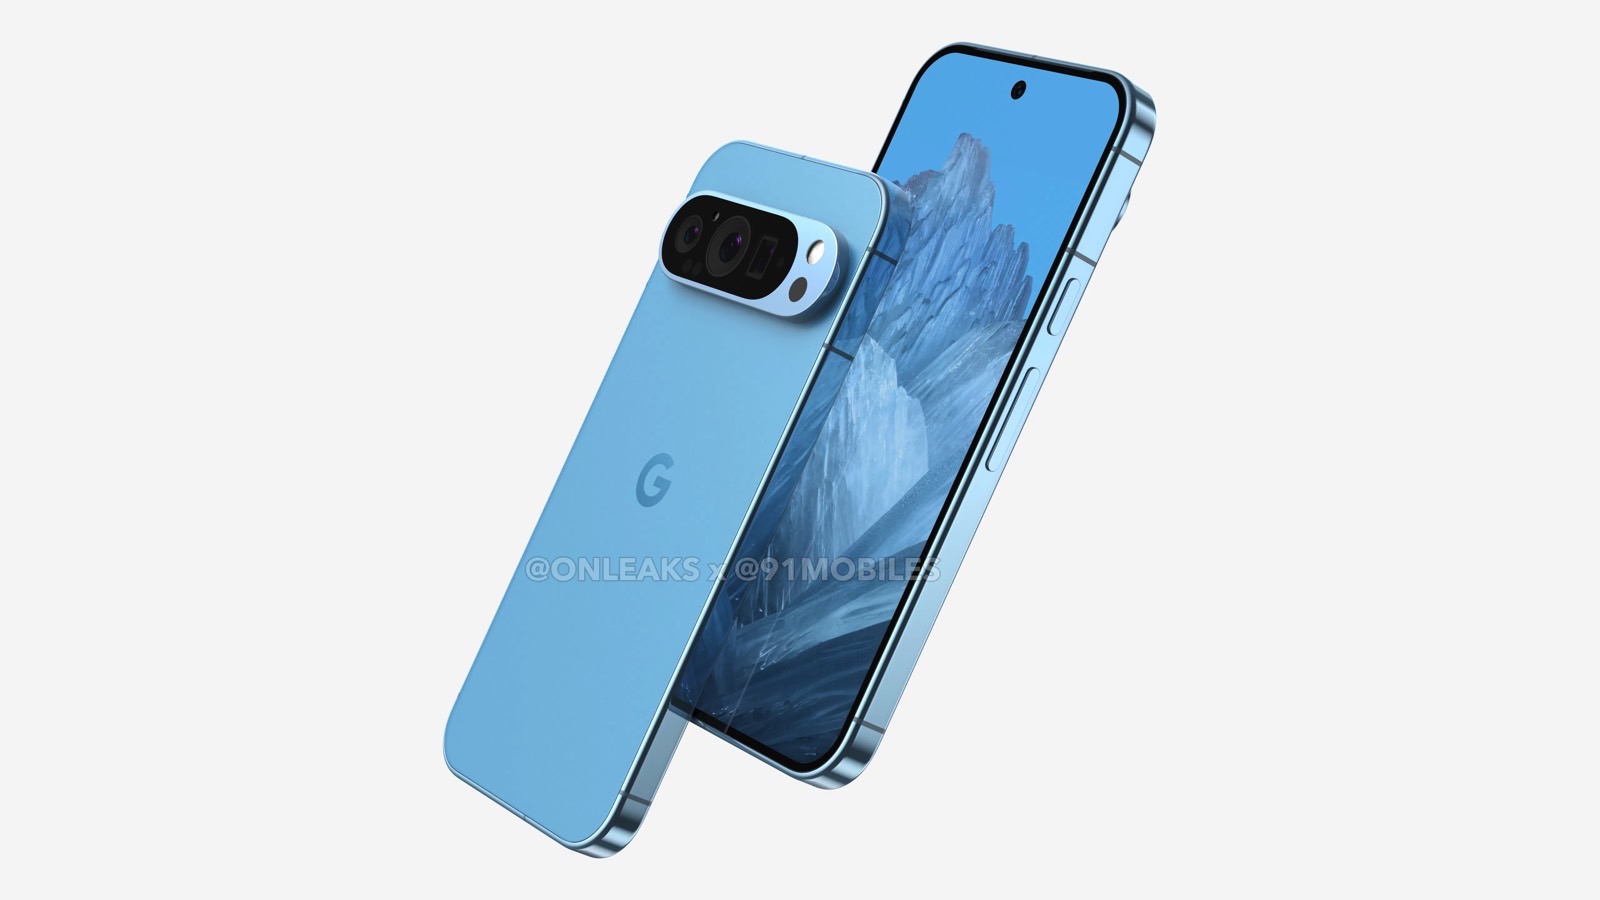 Pixel 9 will feature three cameras on the back, according to design leak.